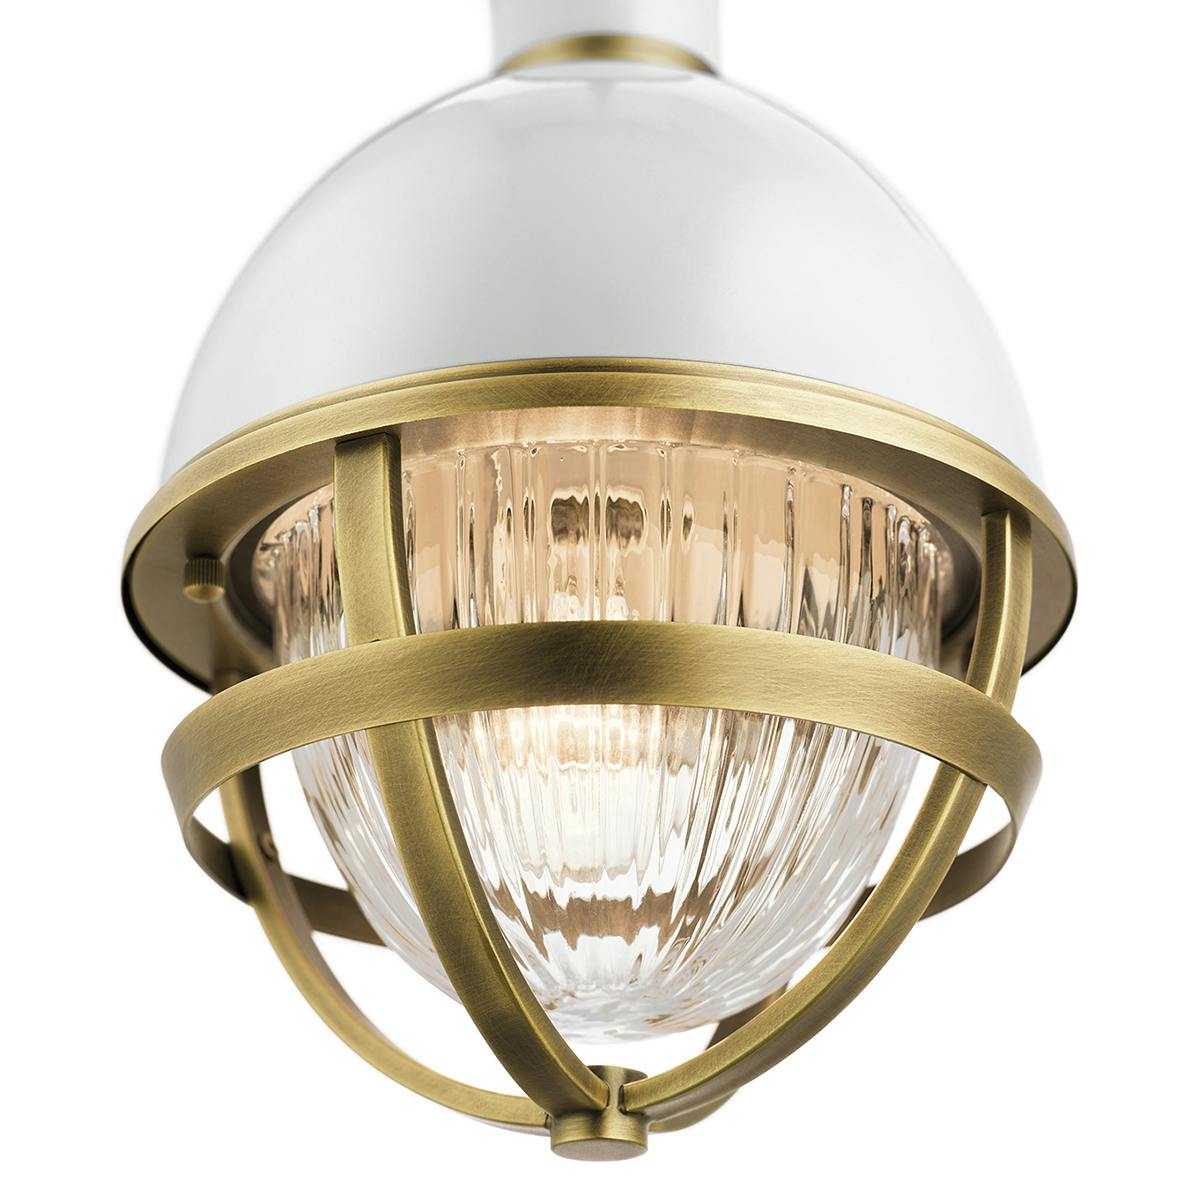 Close up view of the Tollis 12.5" 1 Light Mini Pendant Brass on a white background